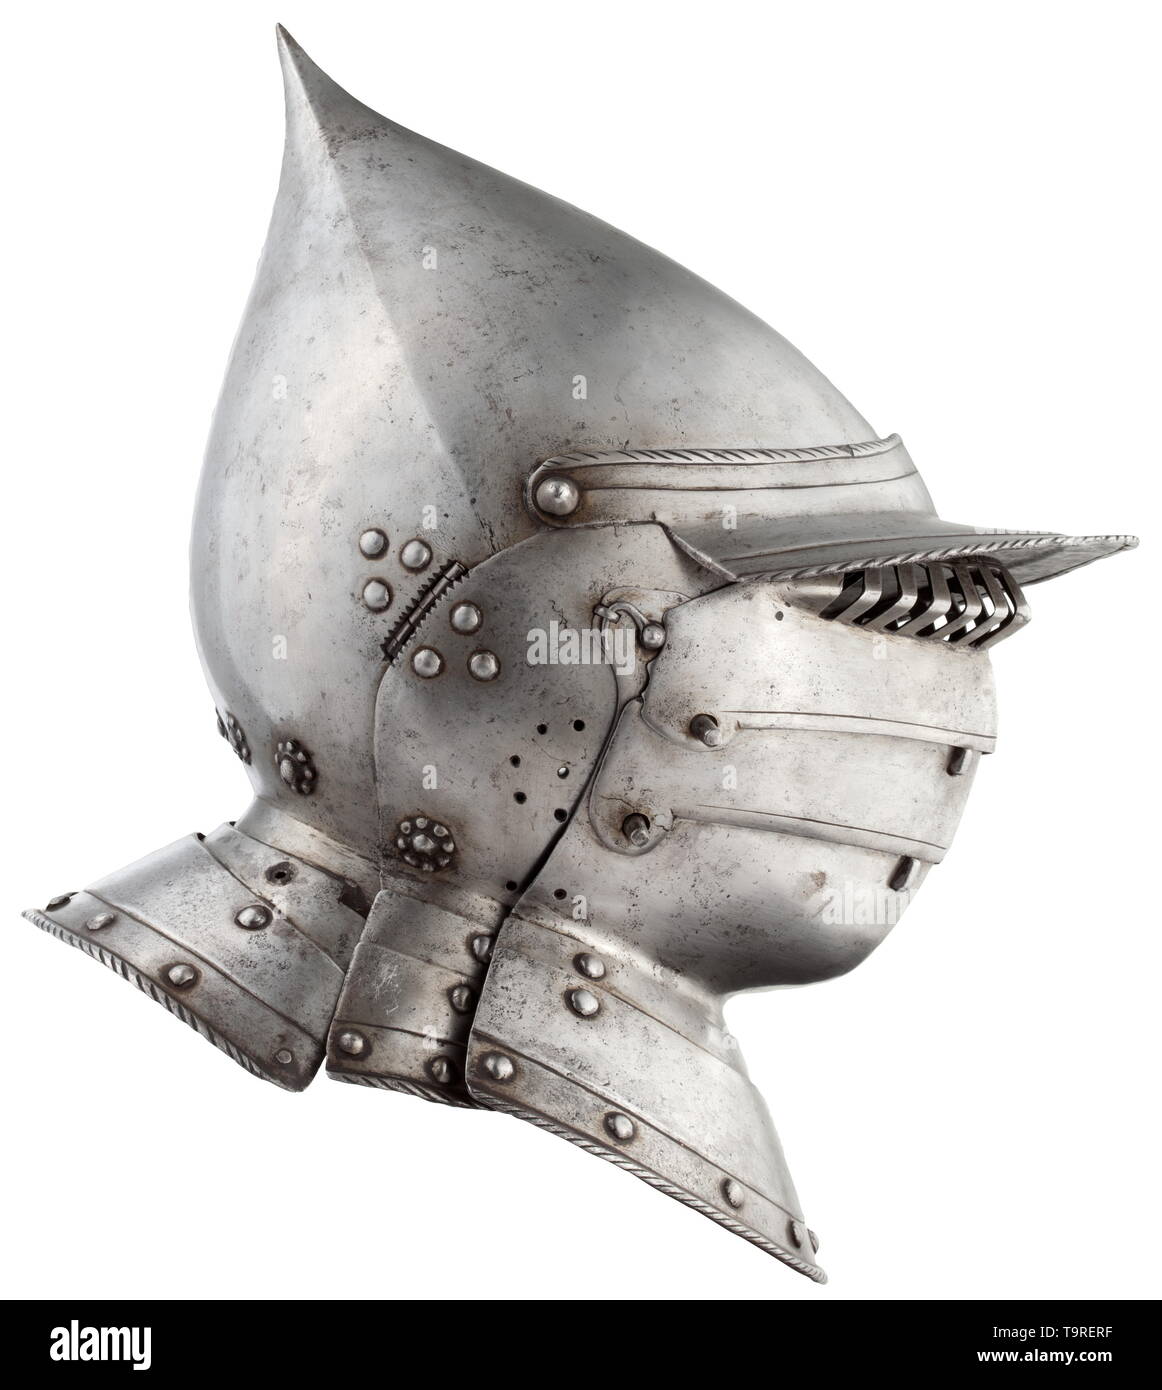 A South German burgonet with pivoted bevor, probably from Augsburg, circa 1550/60 The skull of the Hungarian type forged in one piece, the four ridges terminating in one narrow point. Movable peak with a turned and roped edge, the plume socket mounted on the left. Hinged cheek pieces with eight pierced openings for hearing. The neck guard sliding on two lames, also with a turned and roped edge. One rivet is missing. Corresponding bevor, fastened with two lateral hook-and-eye closures. Pivoted chin guard sliding on two lames, with spring-loaded ca, Additional-Rights-Clearance-Info-Not-Available Stock Photo